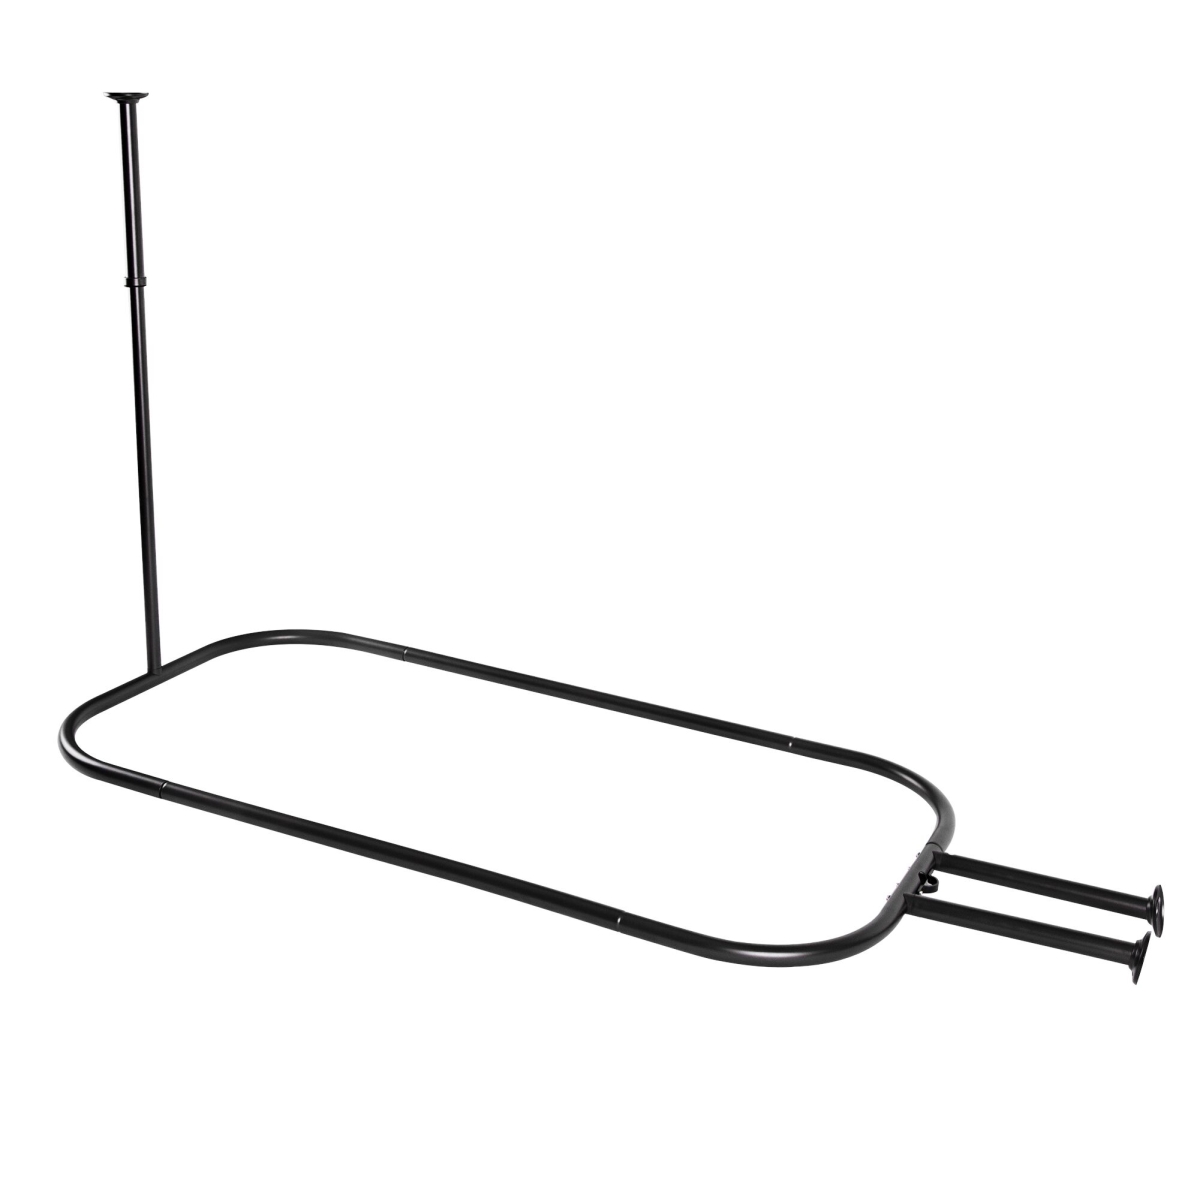 Picture of Utopia Alley HP1BK Utopia Alley Hoop Shower Rod for Clawfoot Tub - Black